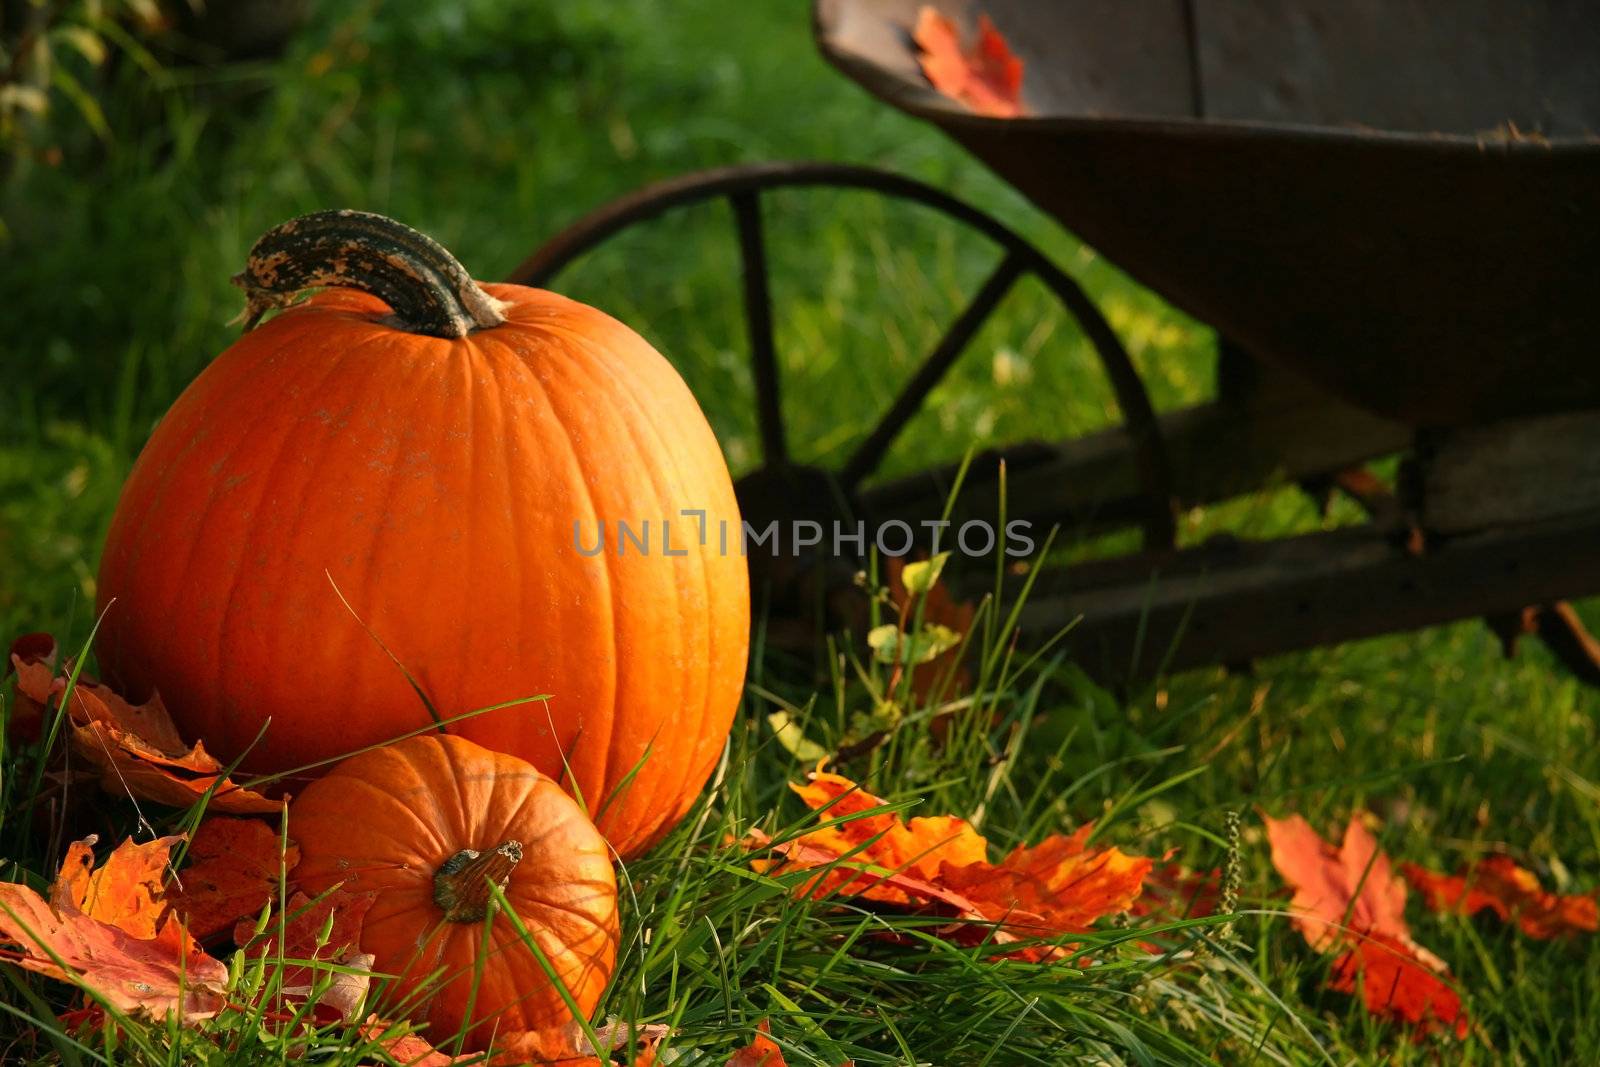 Pumpkins in the grass  with leaves by Sandralise